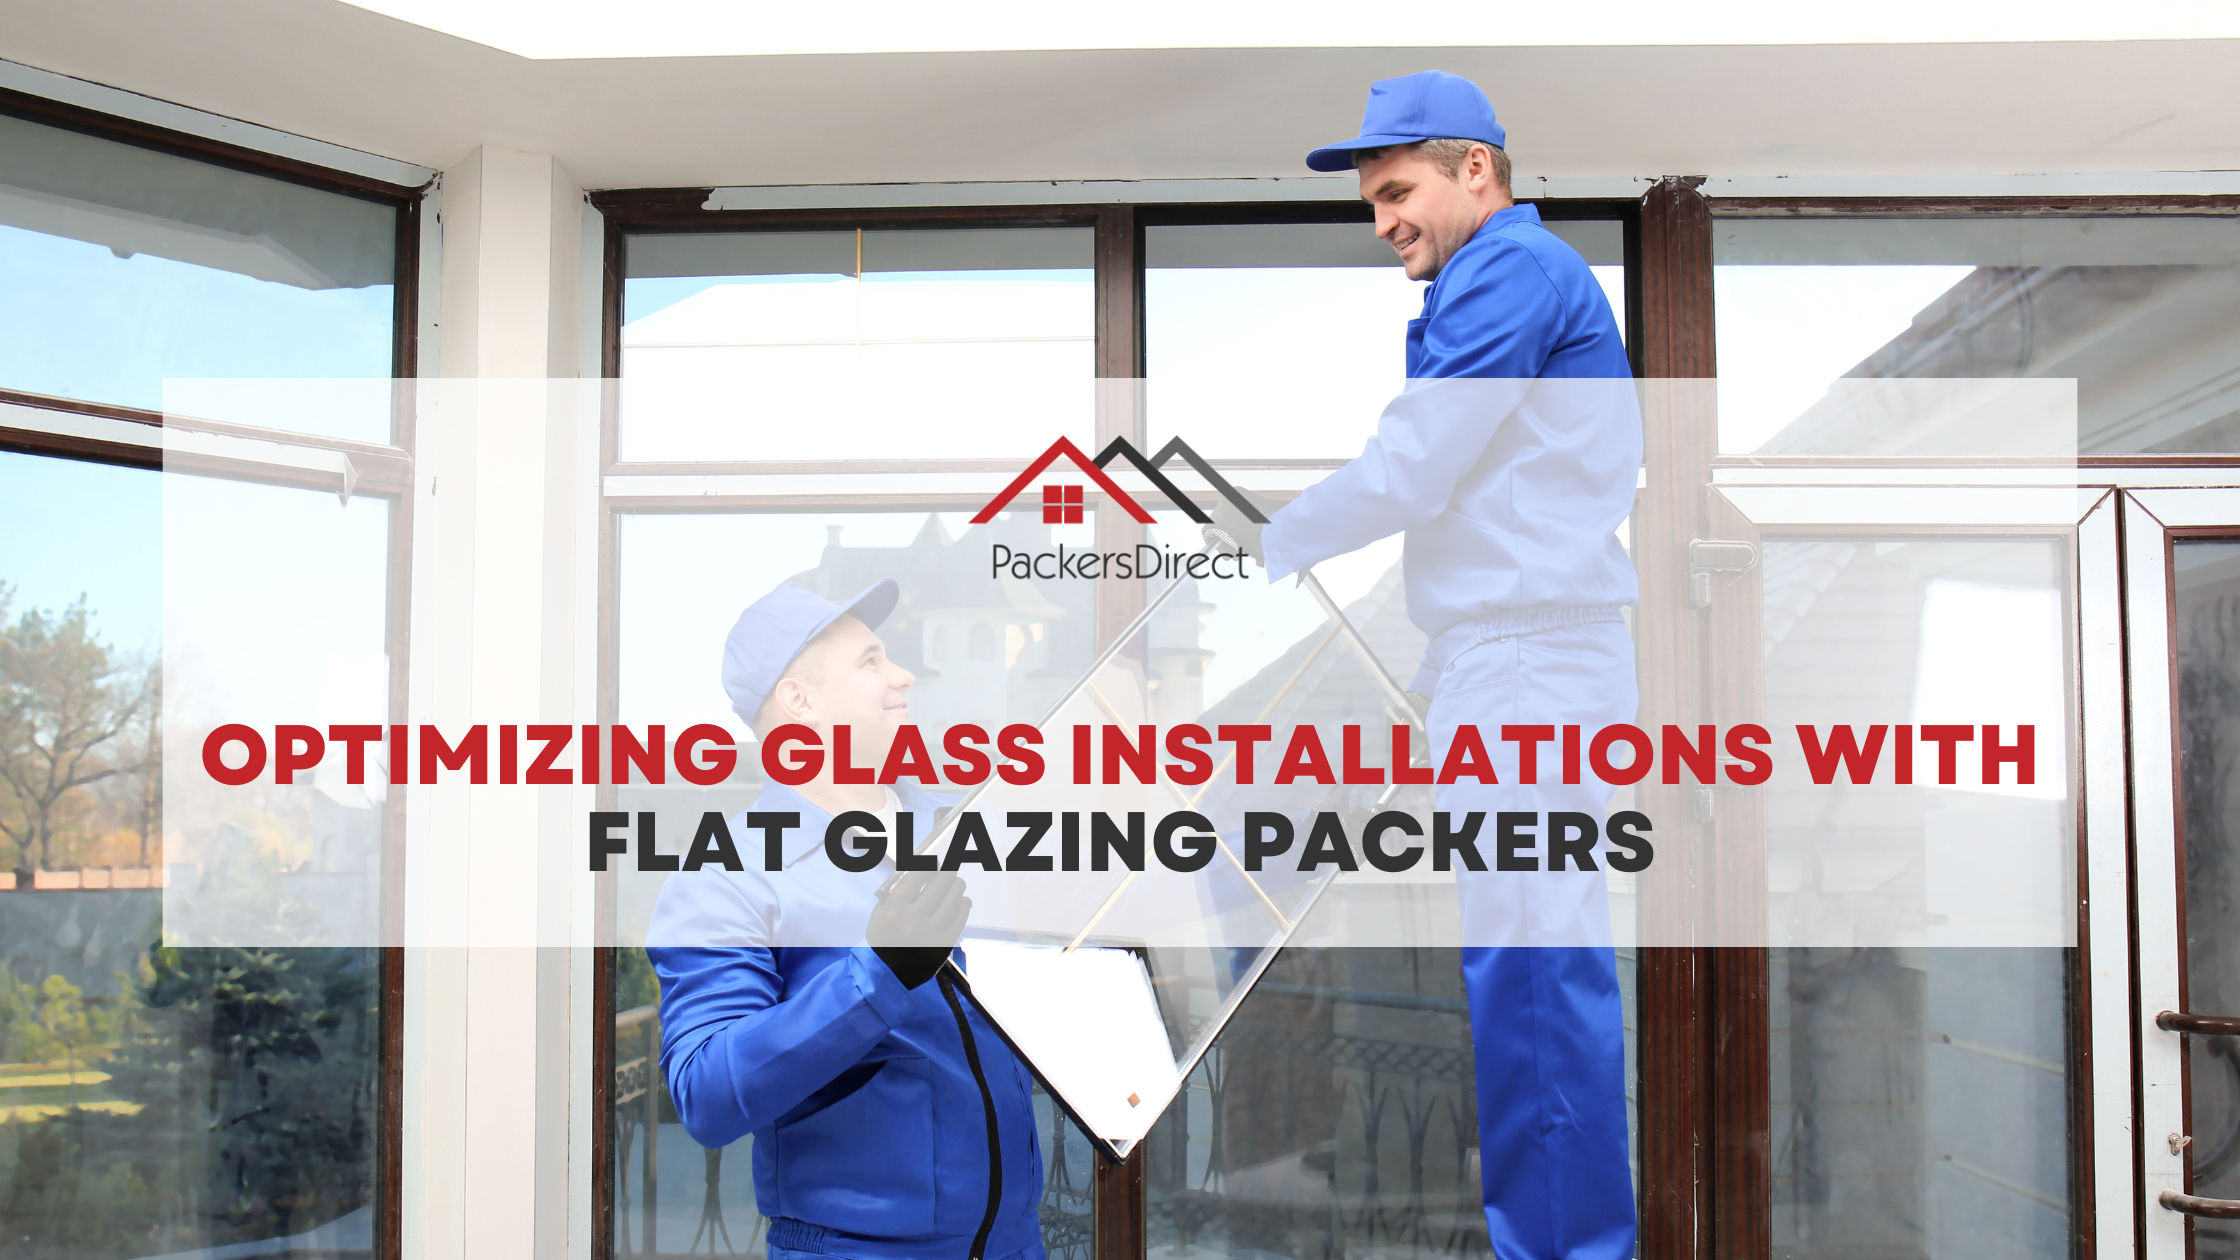 Optimizing Glass Installations with Flat Glazing Packers